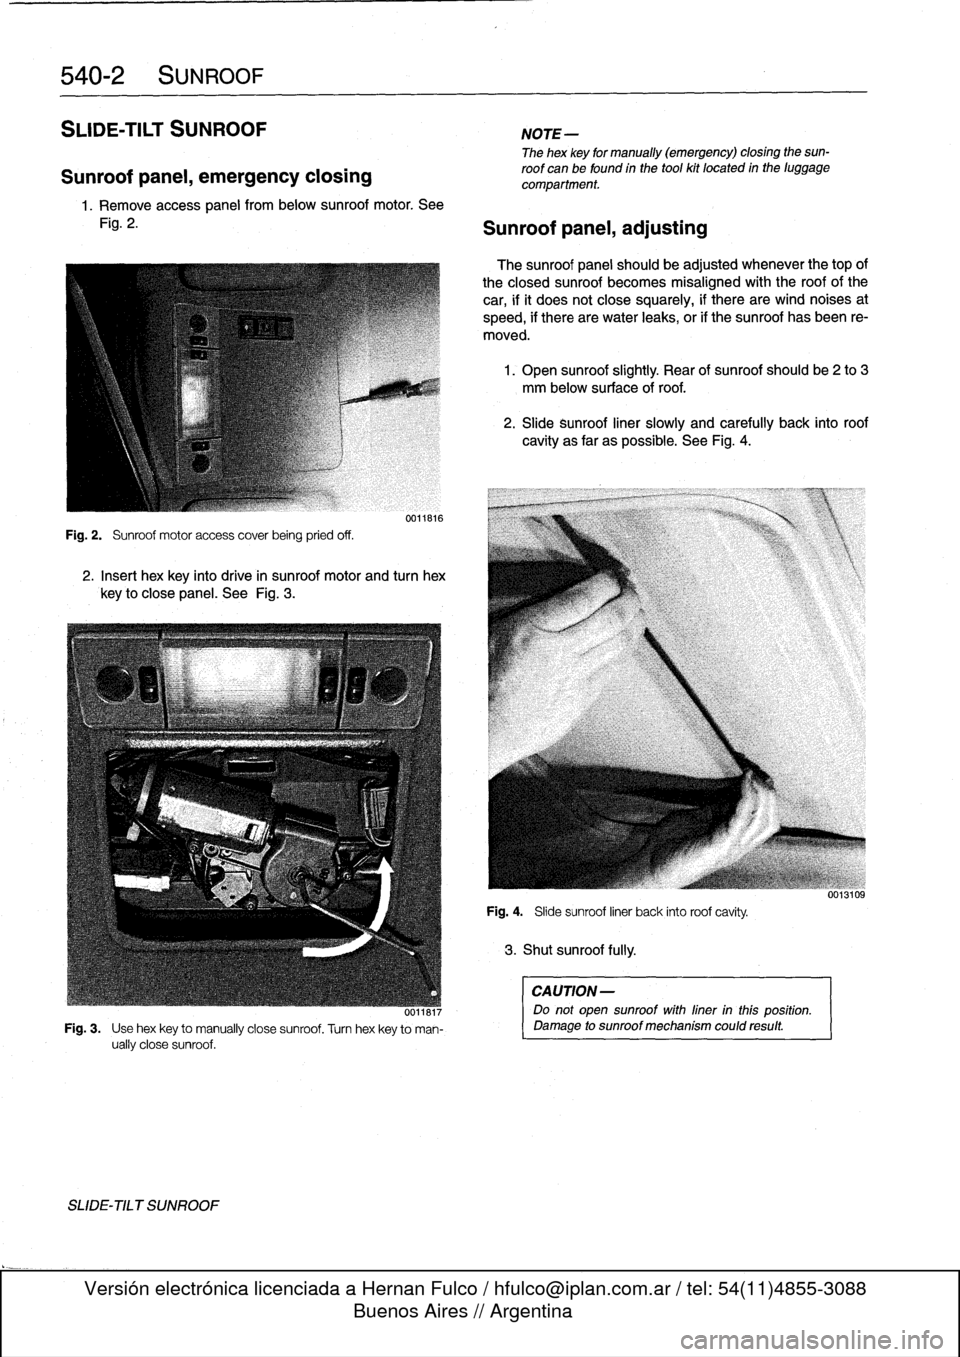 BMW 318i 1998 E36 Workshop Manual 
540-2
SUNROOF

SLIDE-TILT
SUNROOF

Sunroof
panel,
emergency
closing

1.
Remove
access
panel
frombelow
sunroof
motor
.
See

Fig
.
2
.

Fig
.
2
.

	

Sunroof
motor
access
coverbeing
pried
off
.

001181